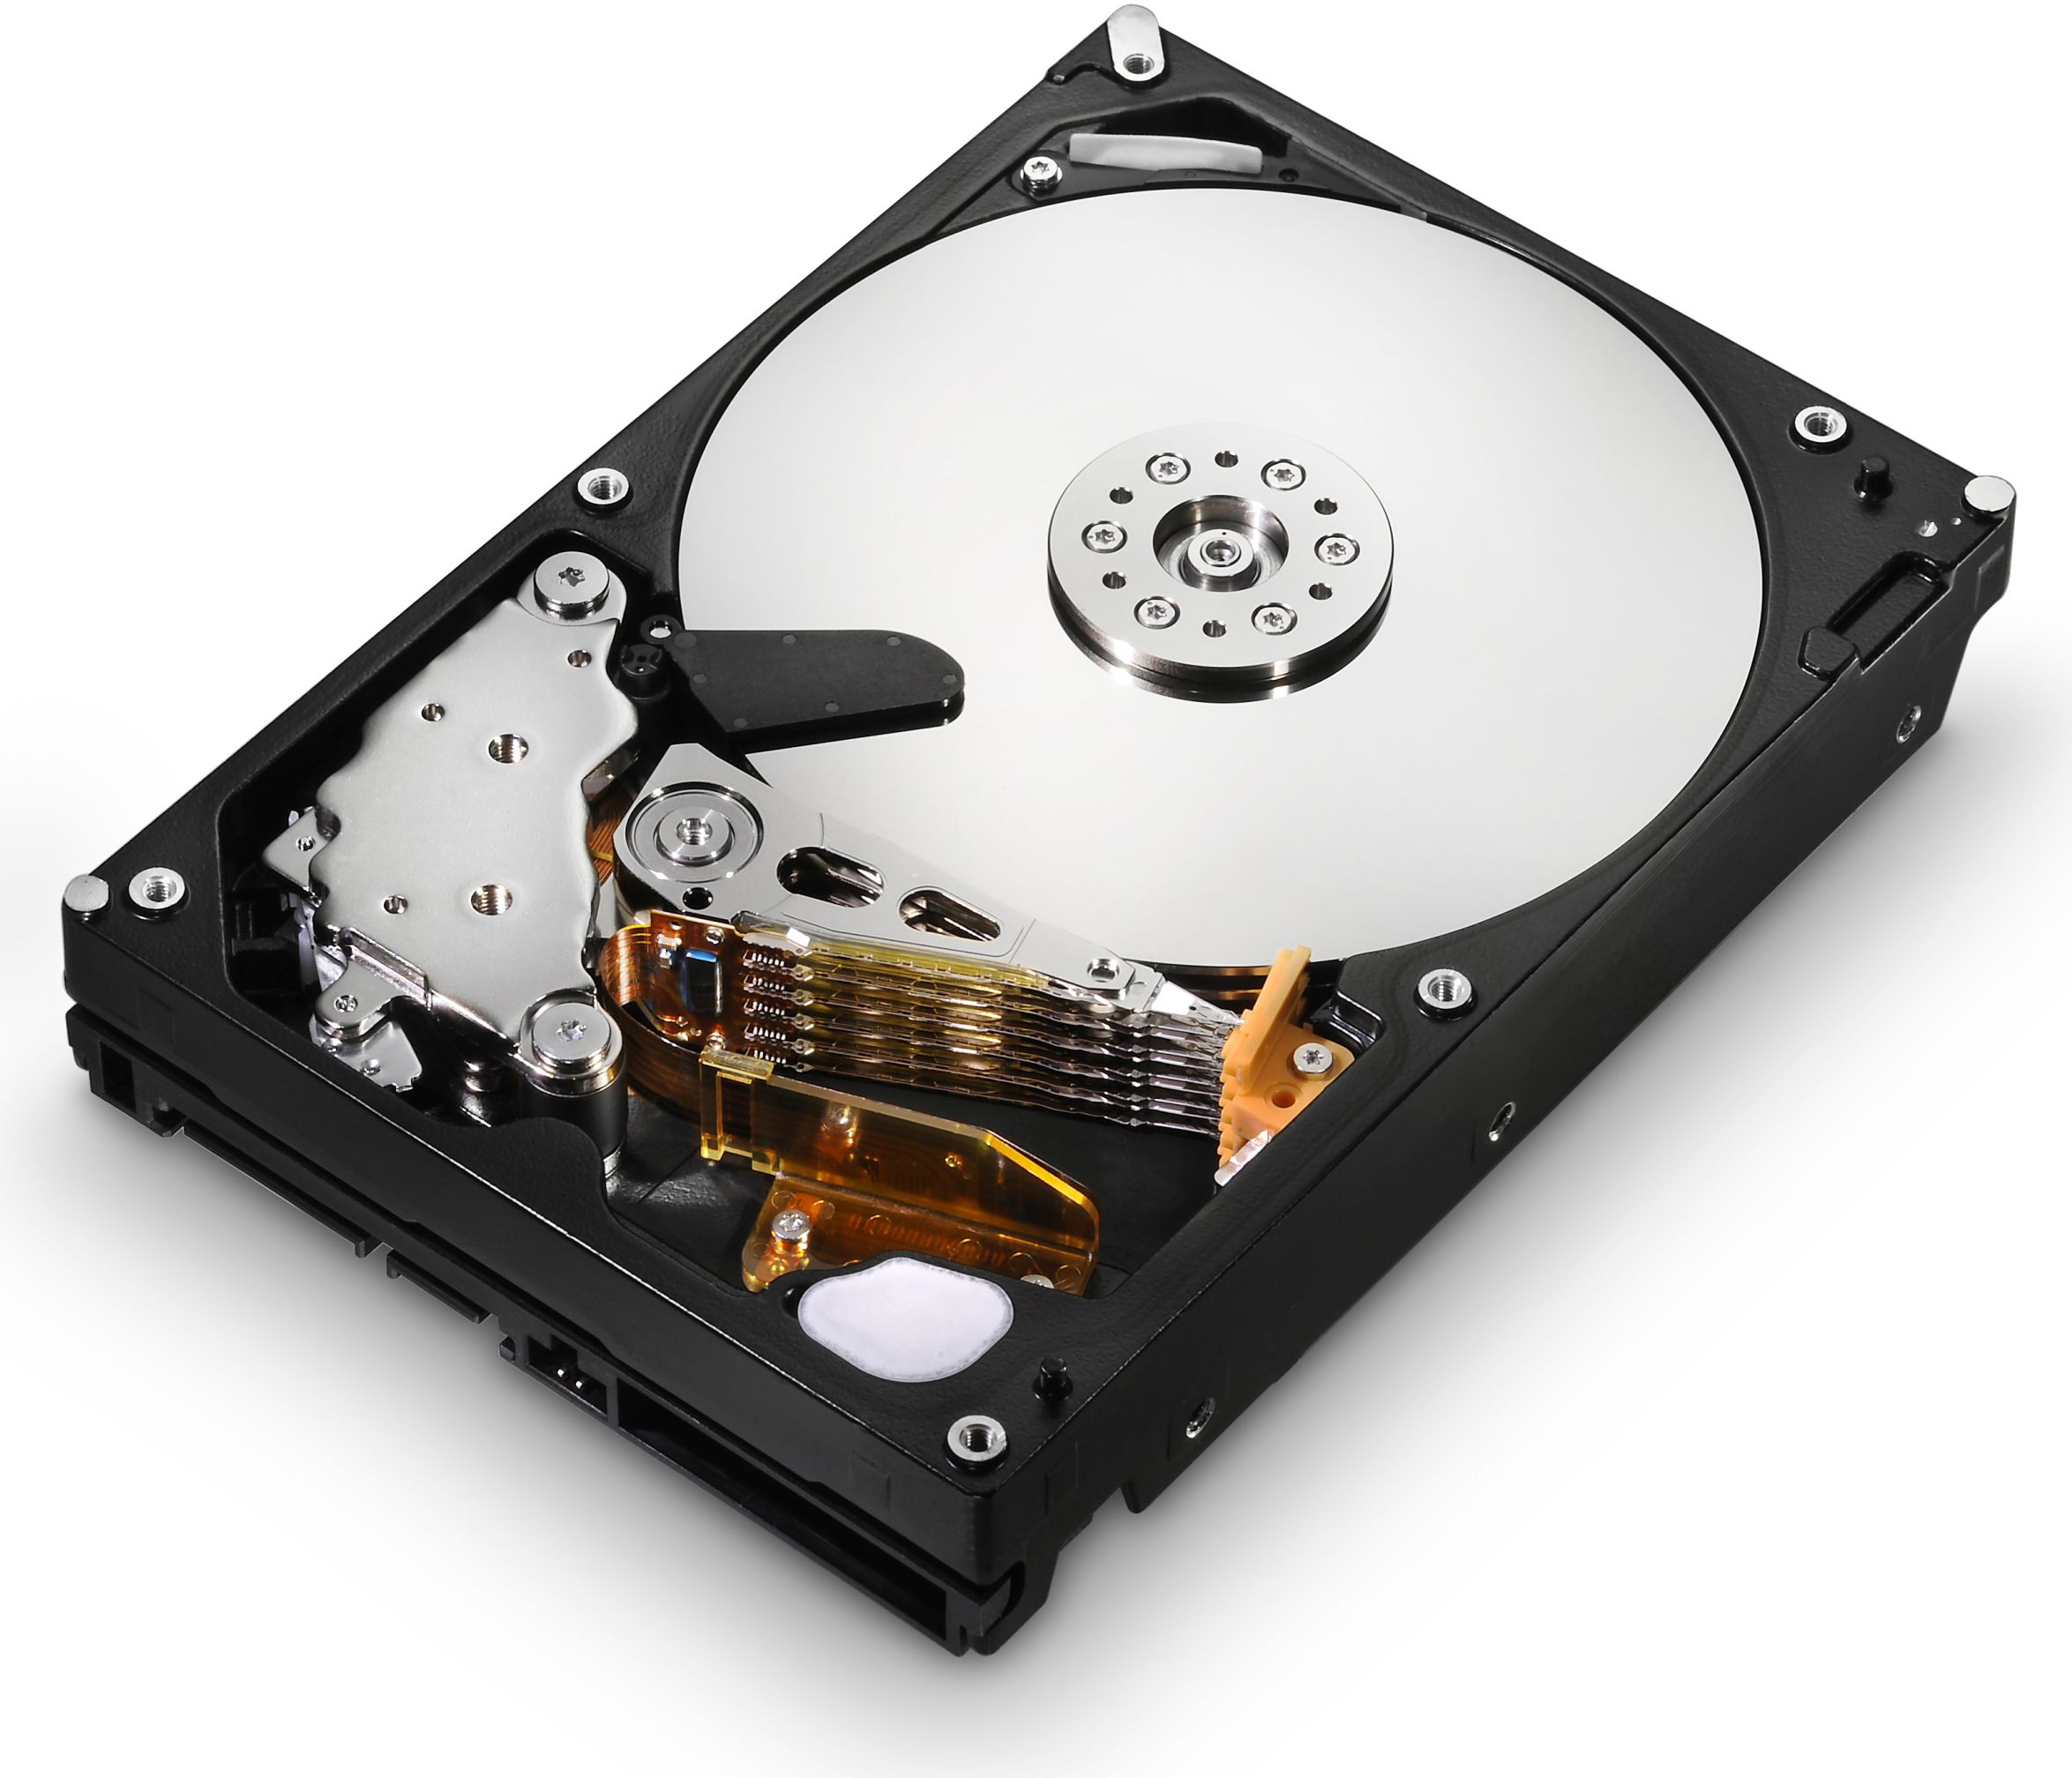 Images of Hard Disk Drive | 2349x2016